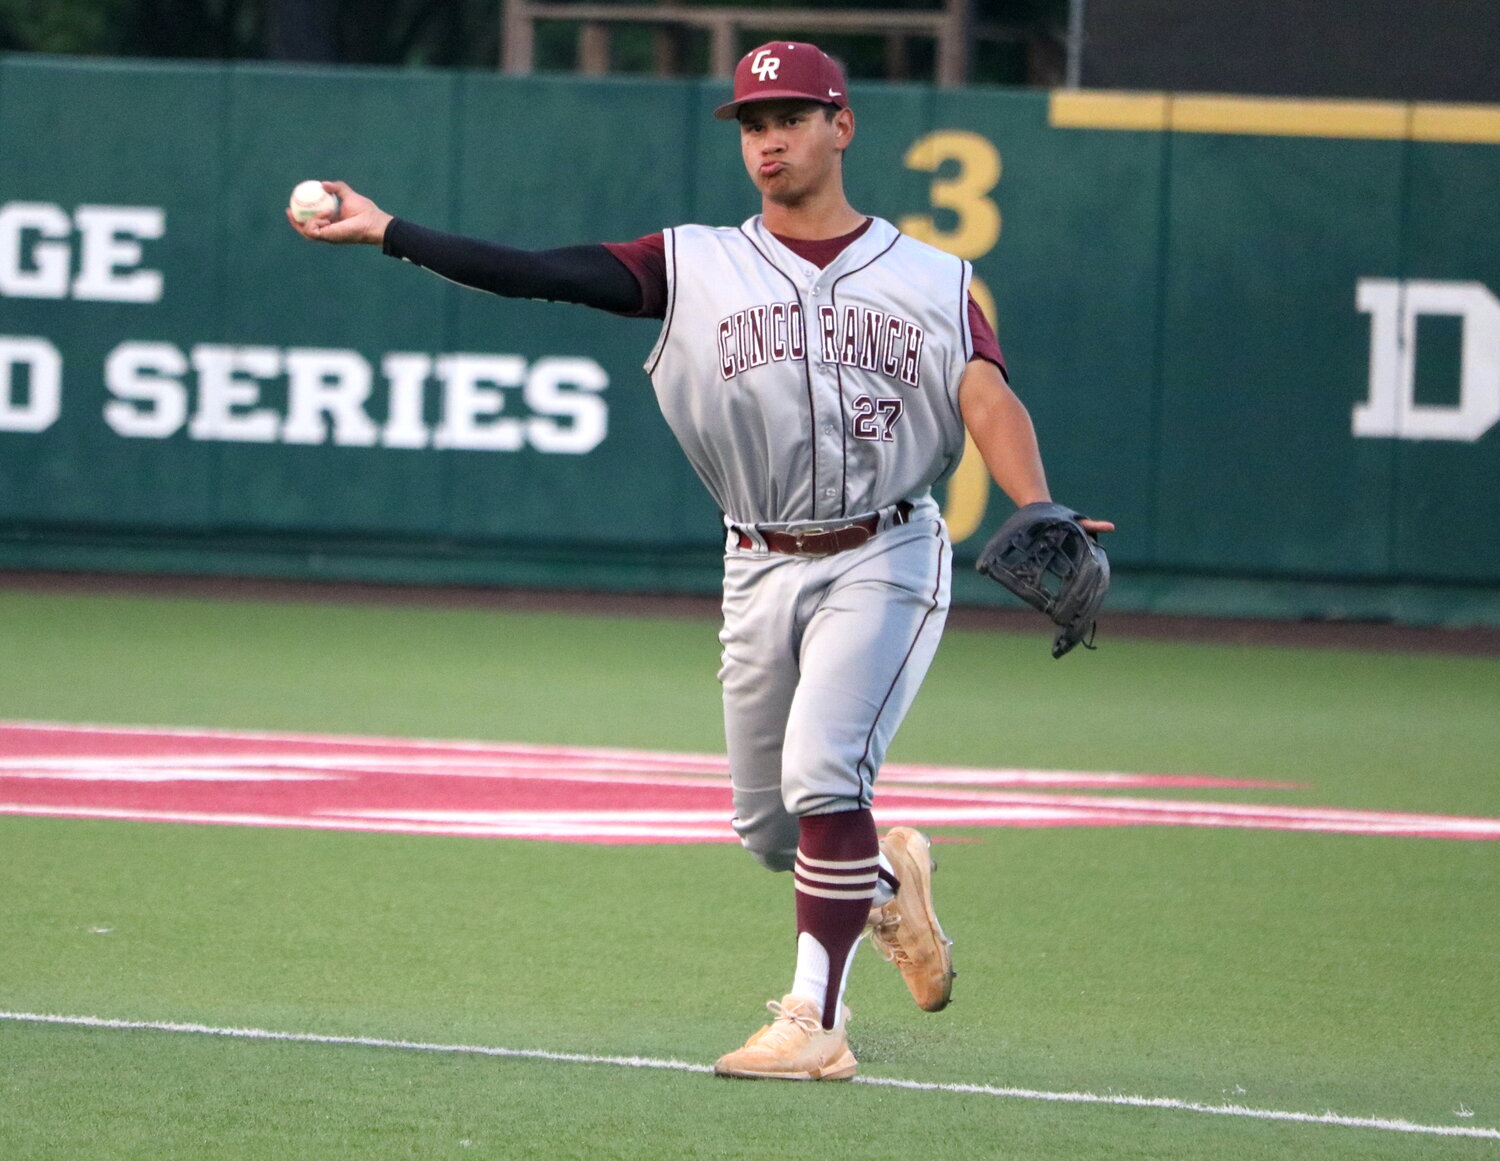 Rainier Castillo throws to first during Friday's regional semifinal between Cinco Ranch and Pearland at The University of Houston.